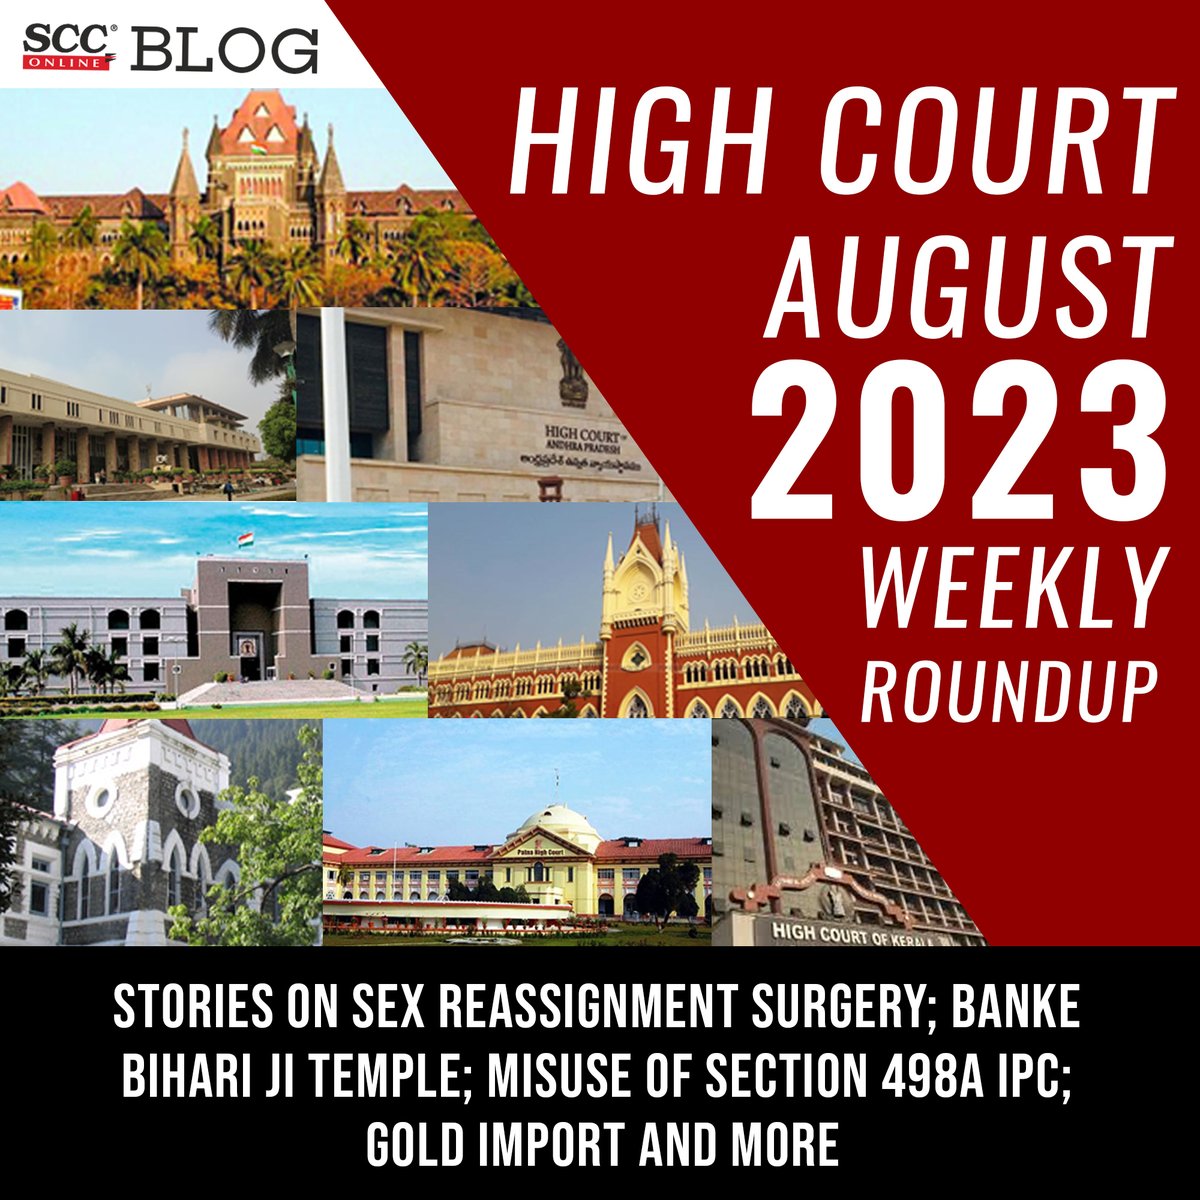 HIGH COURT AUGUST 2023 WEEKLY ROUNDUP| Stories on Sex reassignment surgery; Banke Bihari Ji Temple; Misuse of Section 498A IPC; Gold Import and more
scconline.com/blog/post/2023…

#highcourtroundup #bombayhighcourt #DelhiHighCourt #GoldImport #weeklyroundup #roundup #indianpenalcode